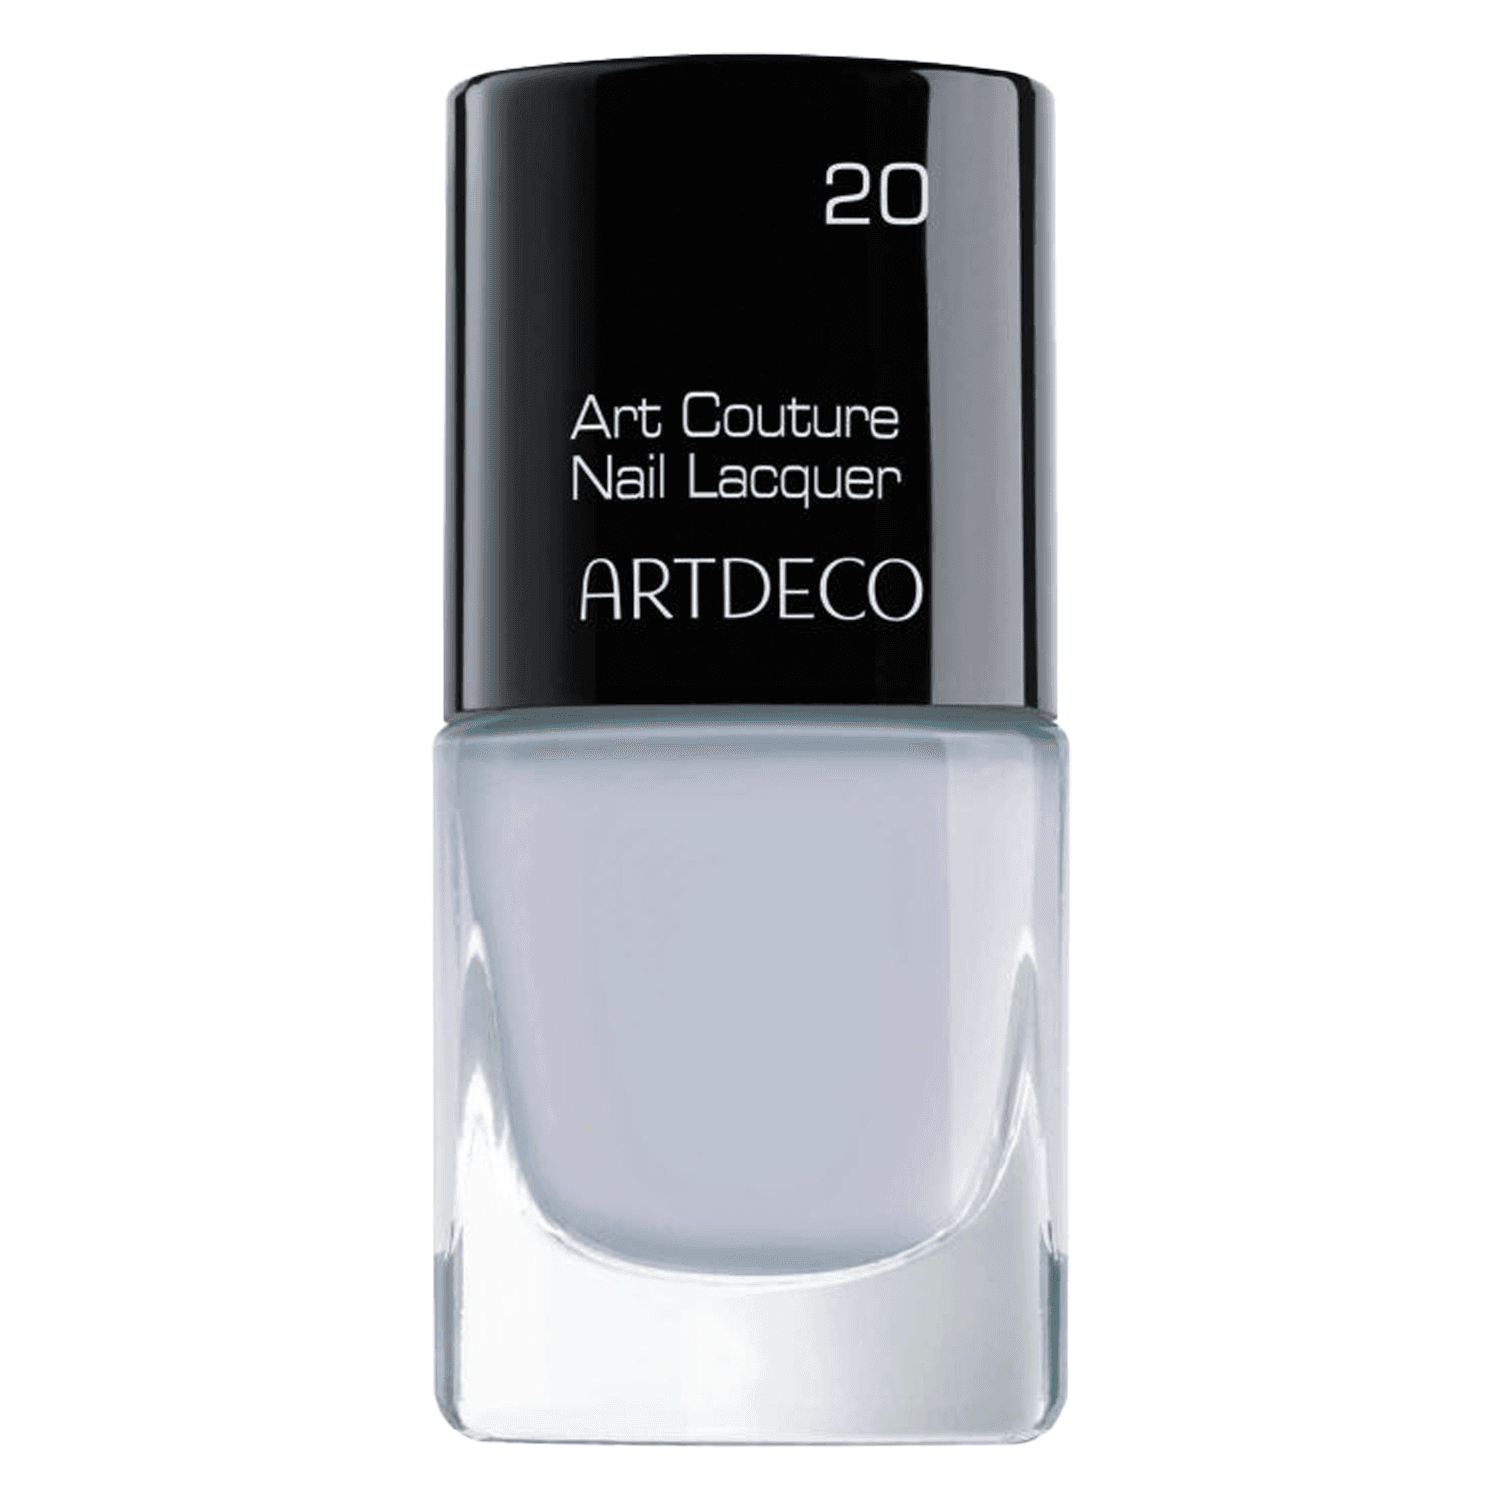 Art Couture - Nail Lacquer Forget-Me-Not 20